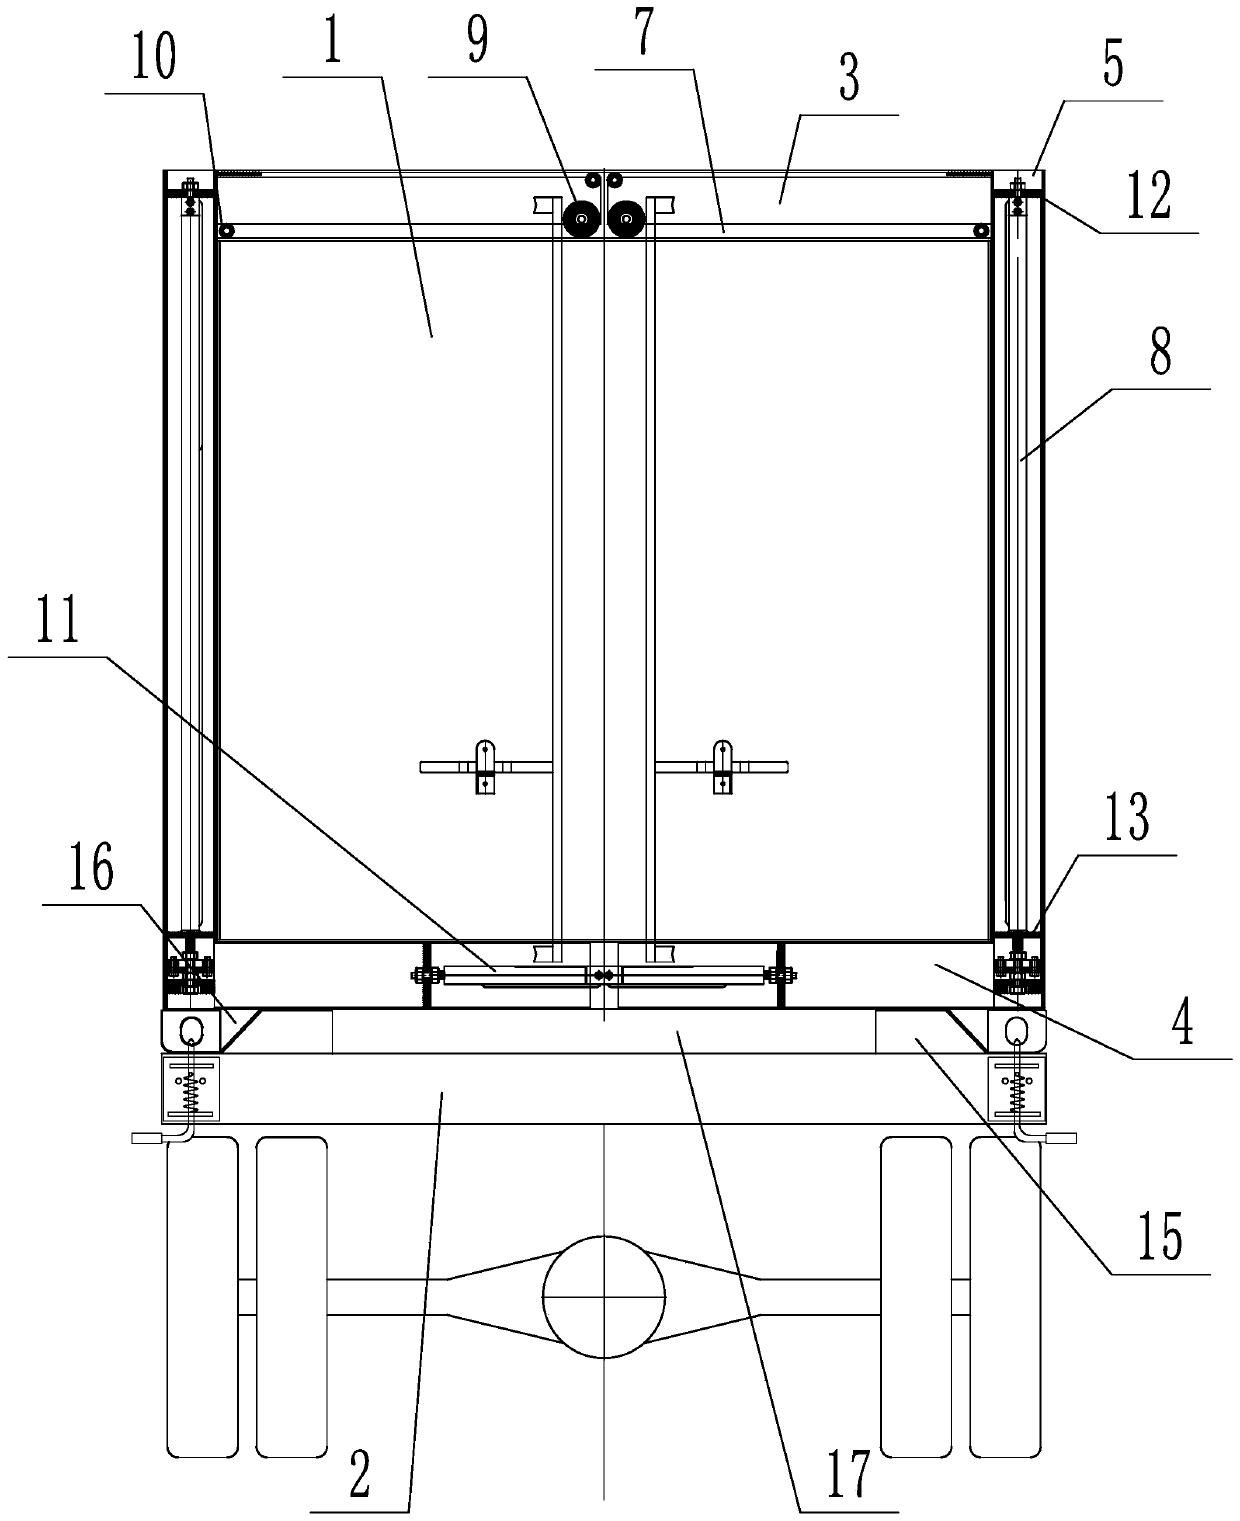 Self-loading and unloading turnover box